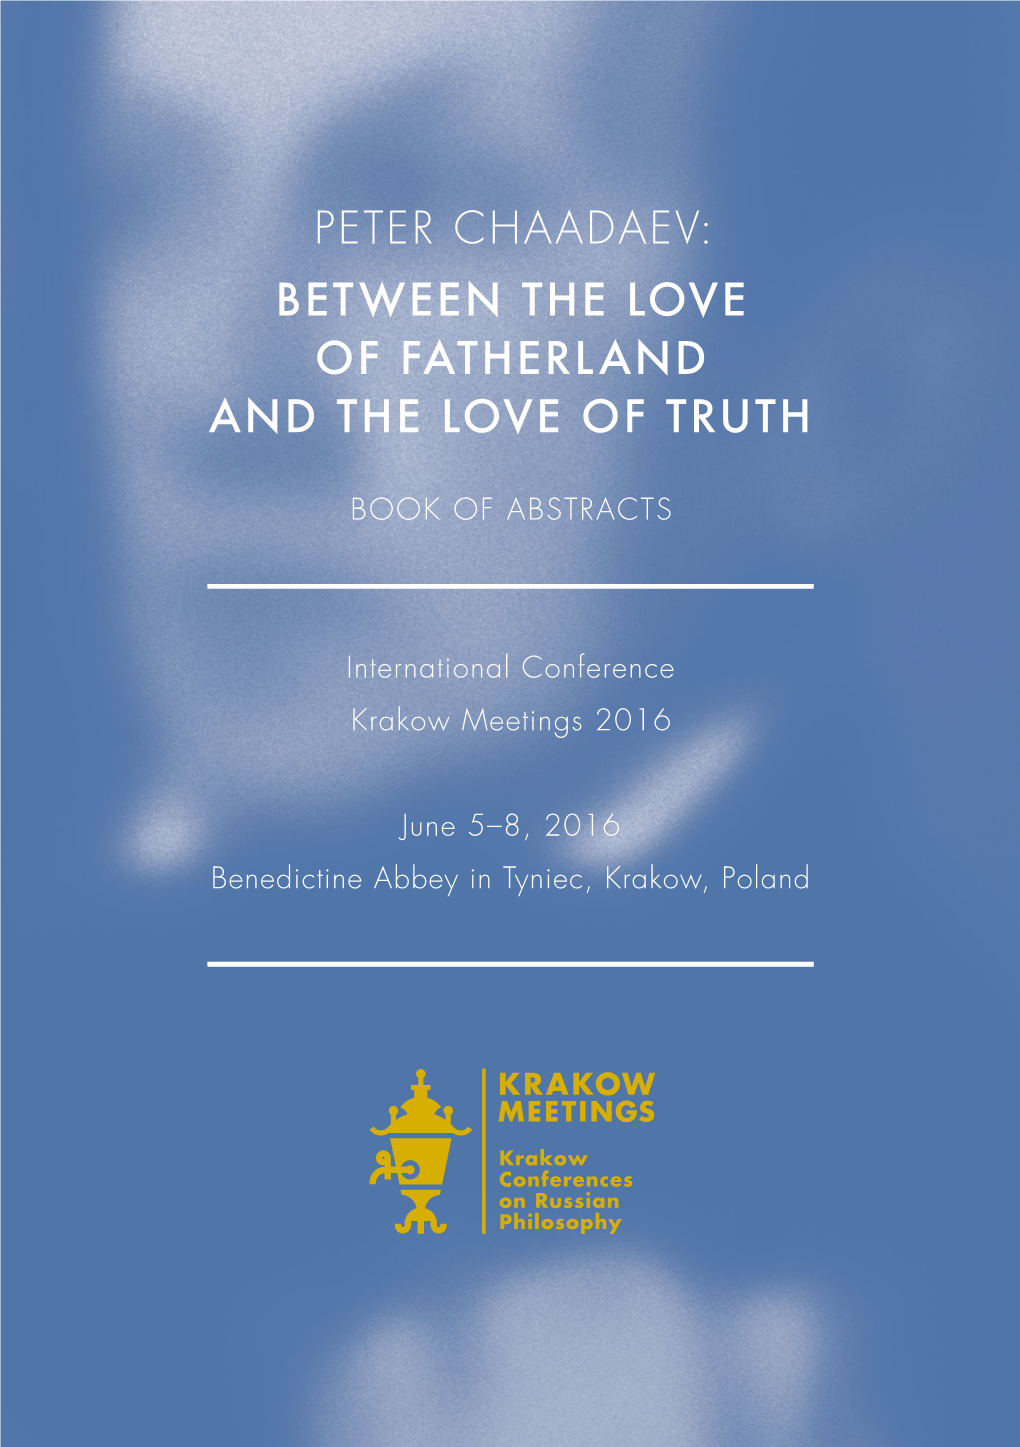 Peter Chaadaev: Between the Love of Fatherland and the Love of Truth